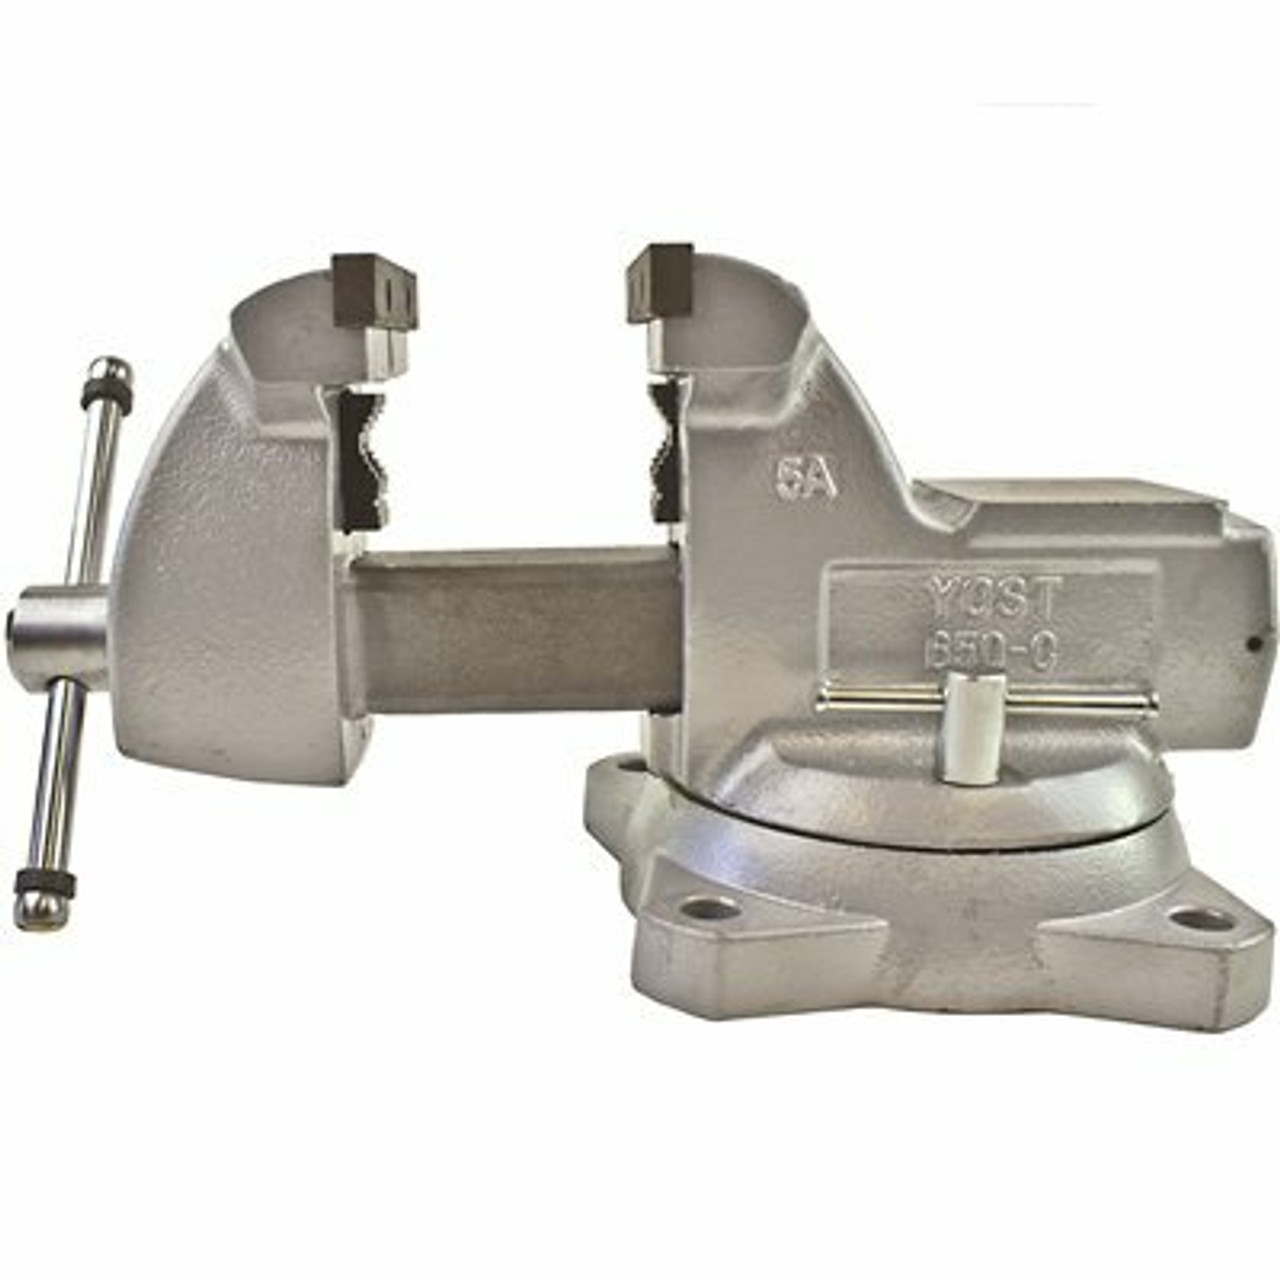 Yost 5 In. Combination Pipe And Bench Mechanics Vise With Swivel Base